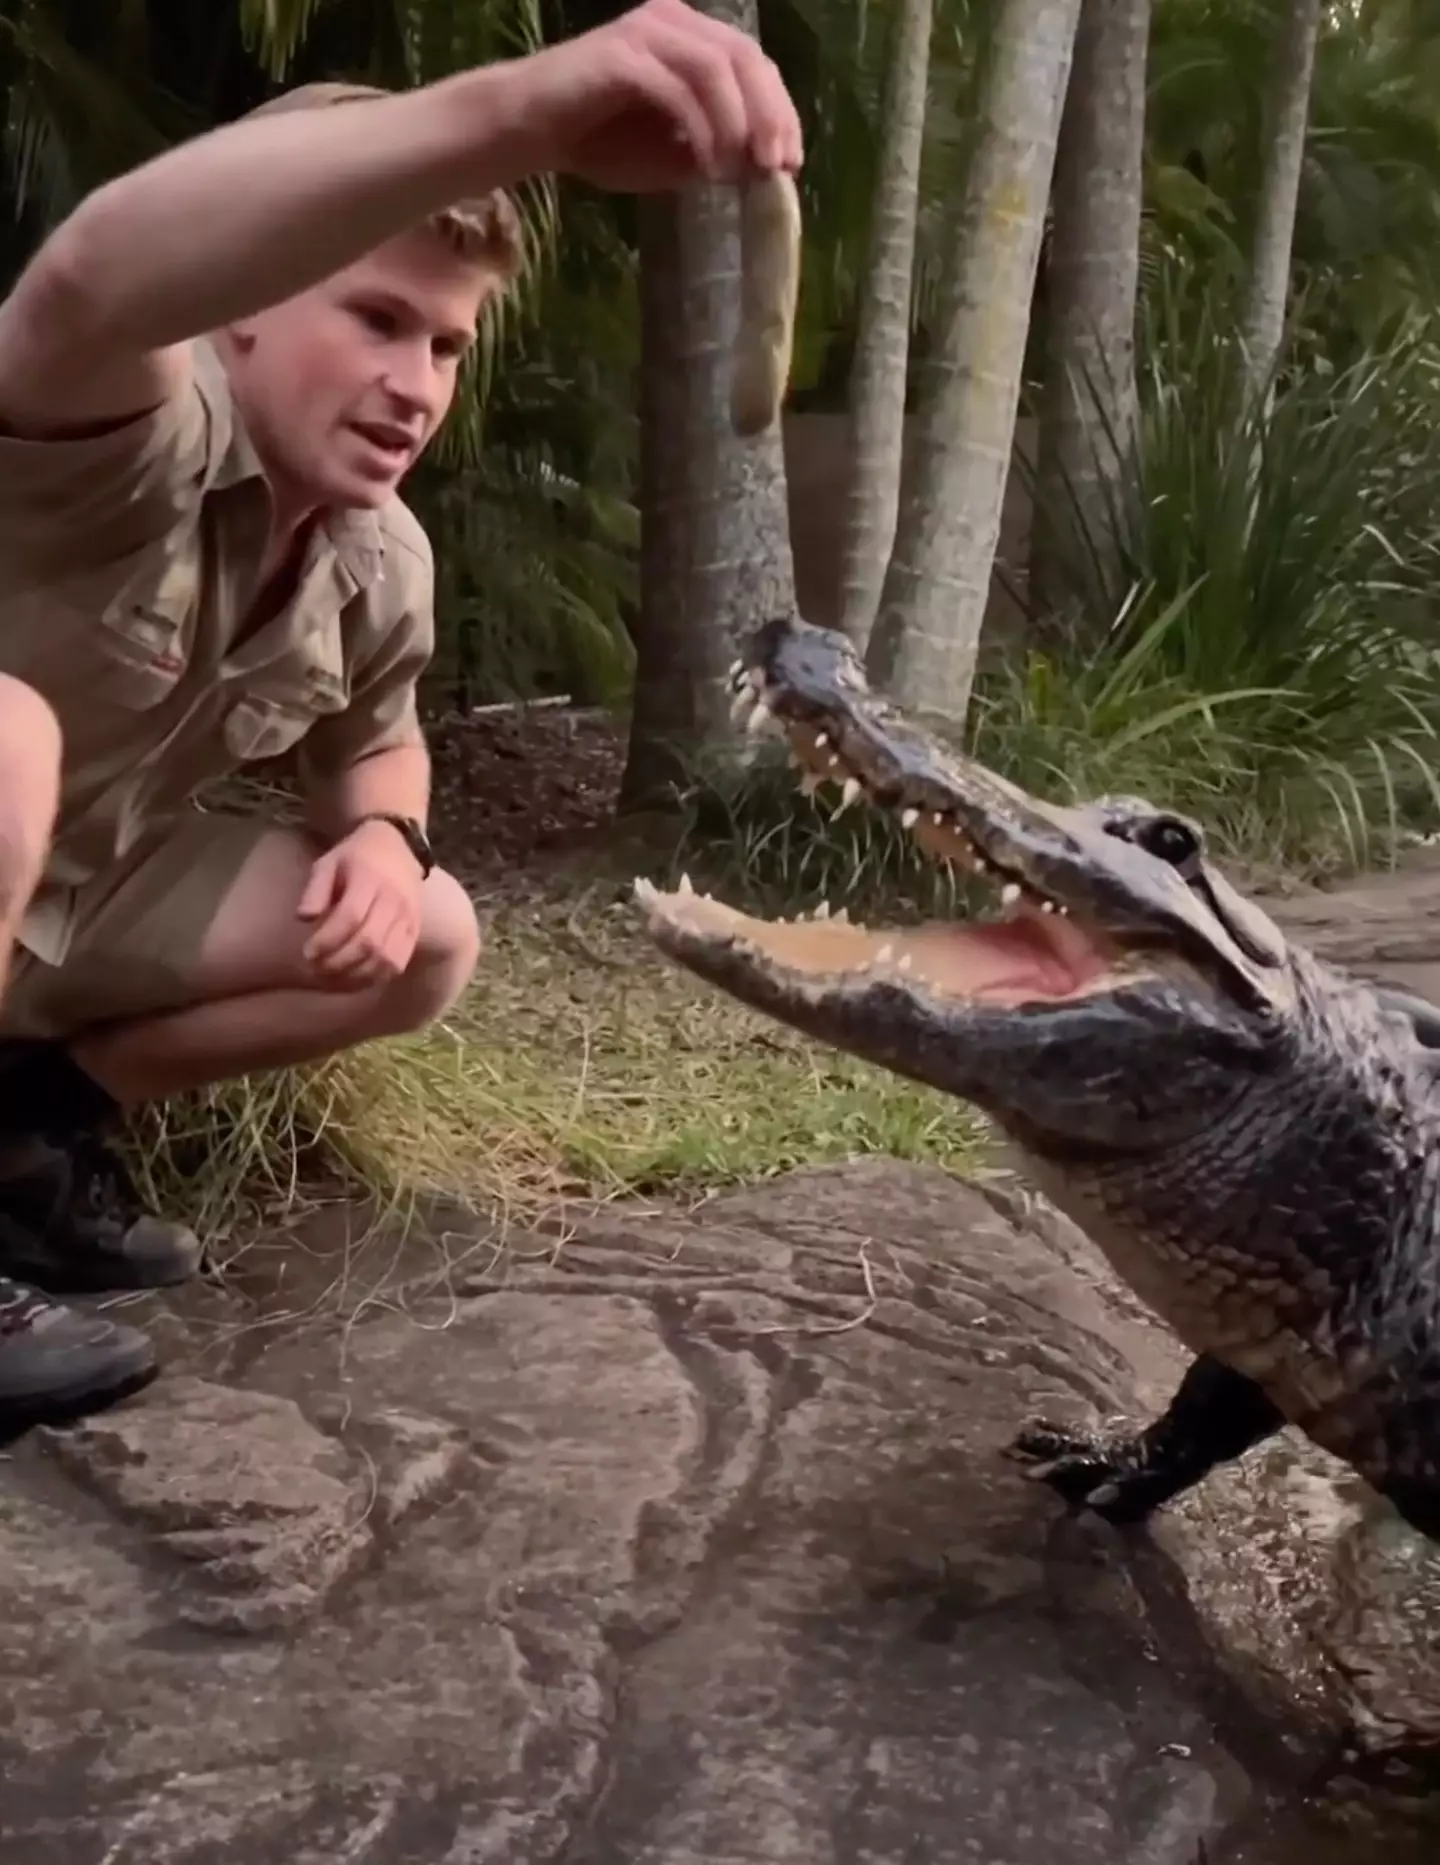 Robert Irwin hopped into the animal enclosure to feed the gators.